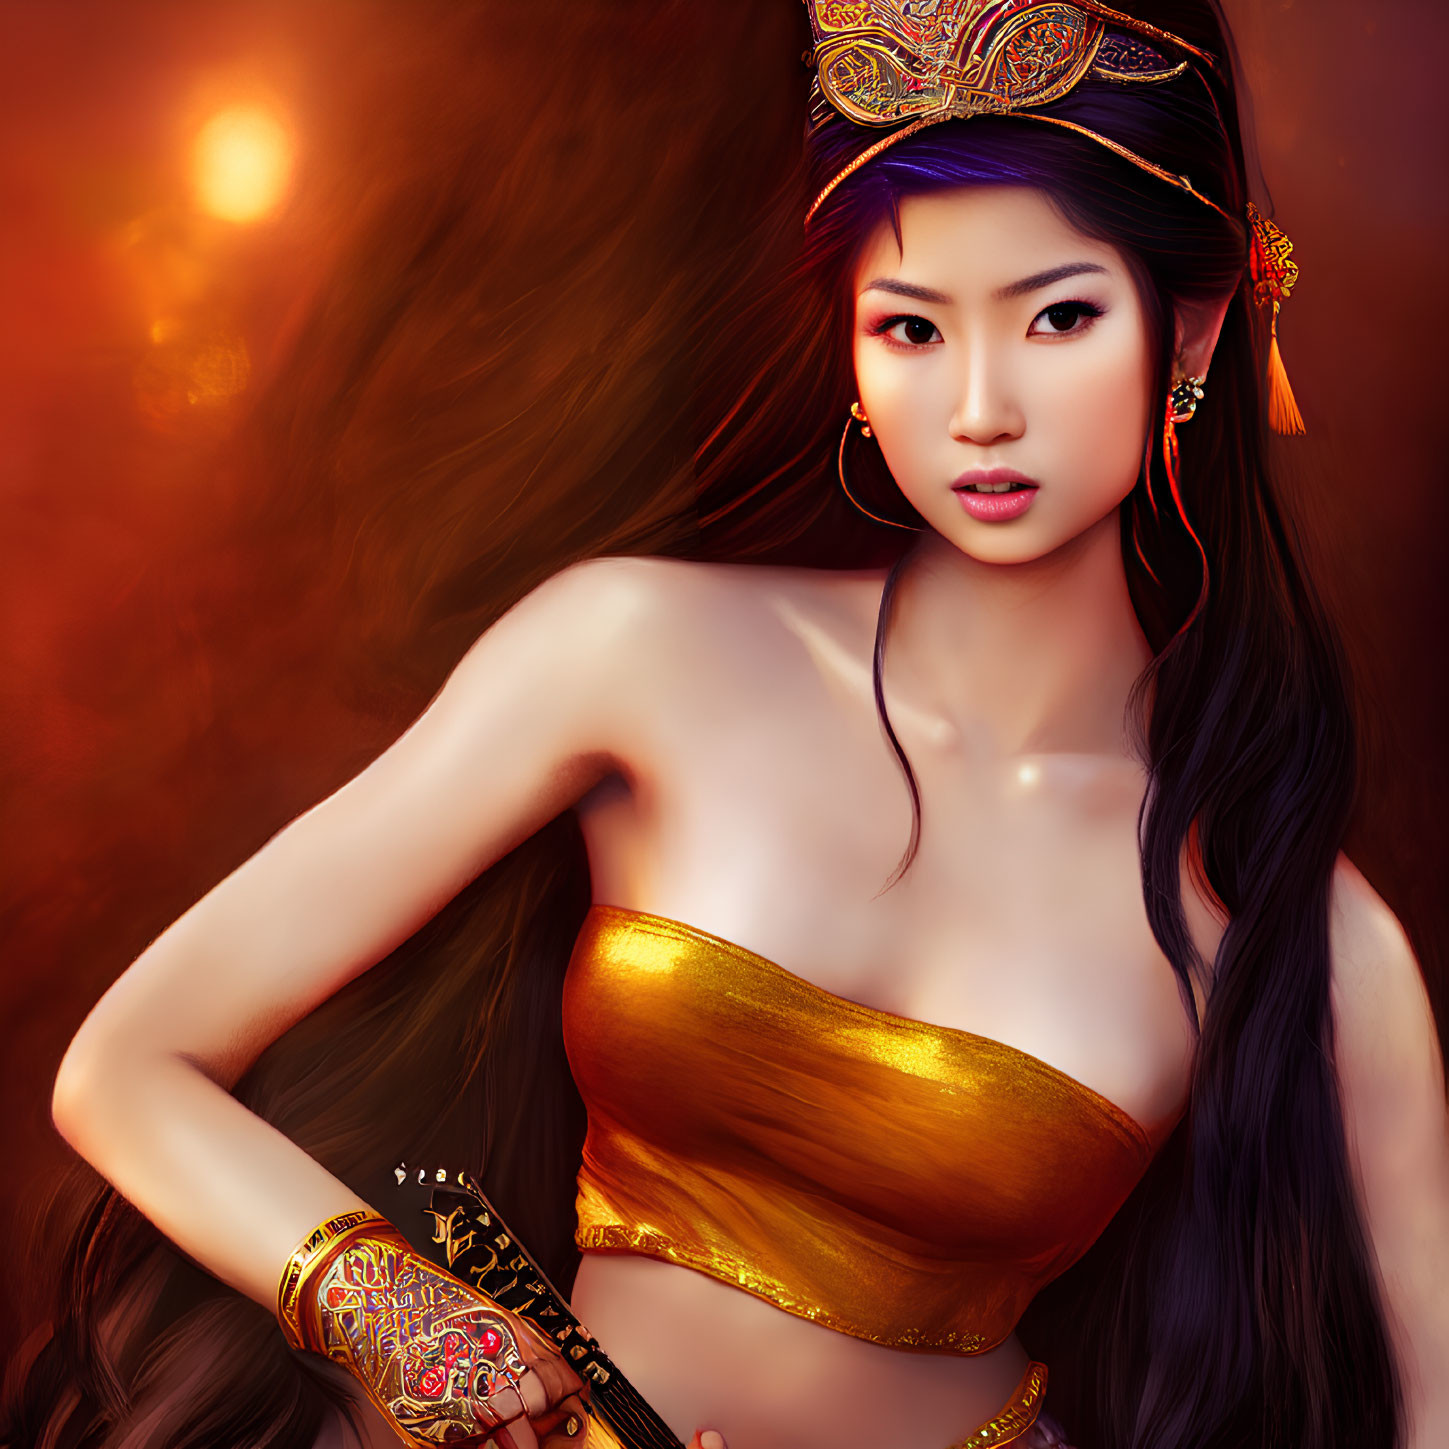 Illustration of woman in golden outfit with long black hair on warm background.